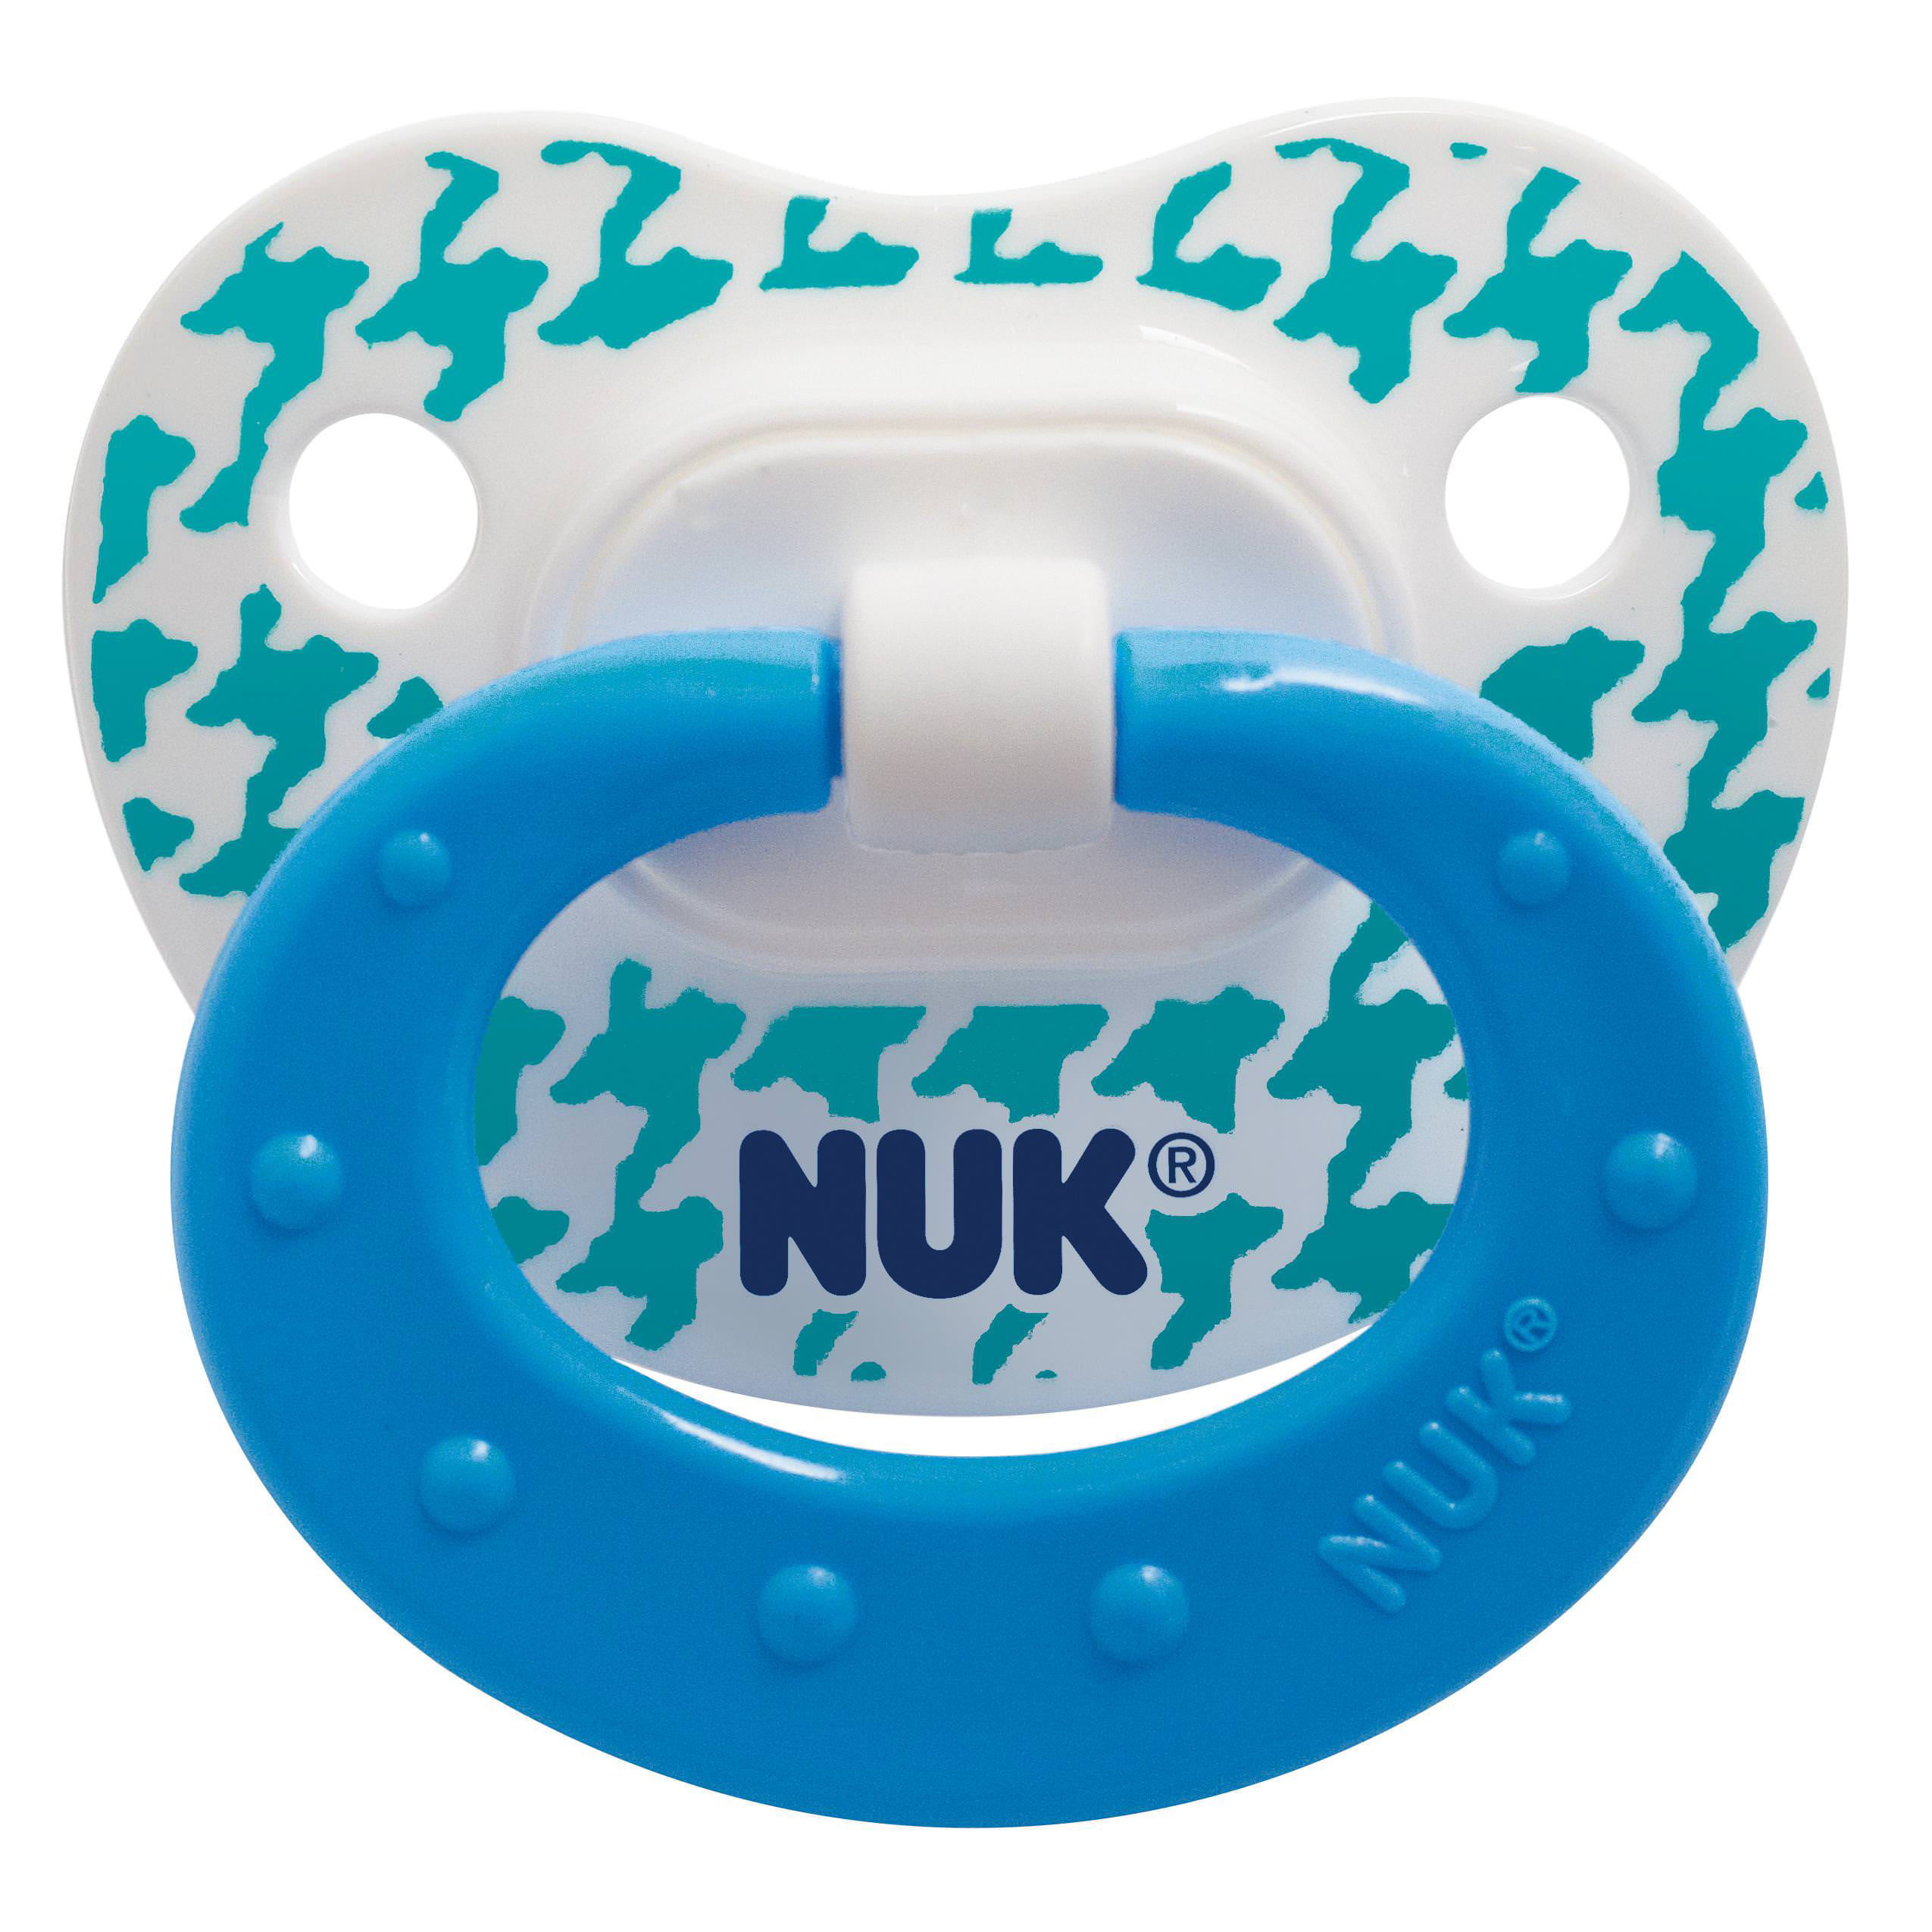 NUK  Toy Story  Jessie Soothers Orthodontic teat  Age 0/6m  2 in pack  Bpa Free 